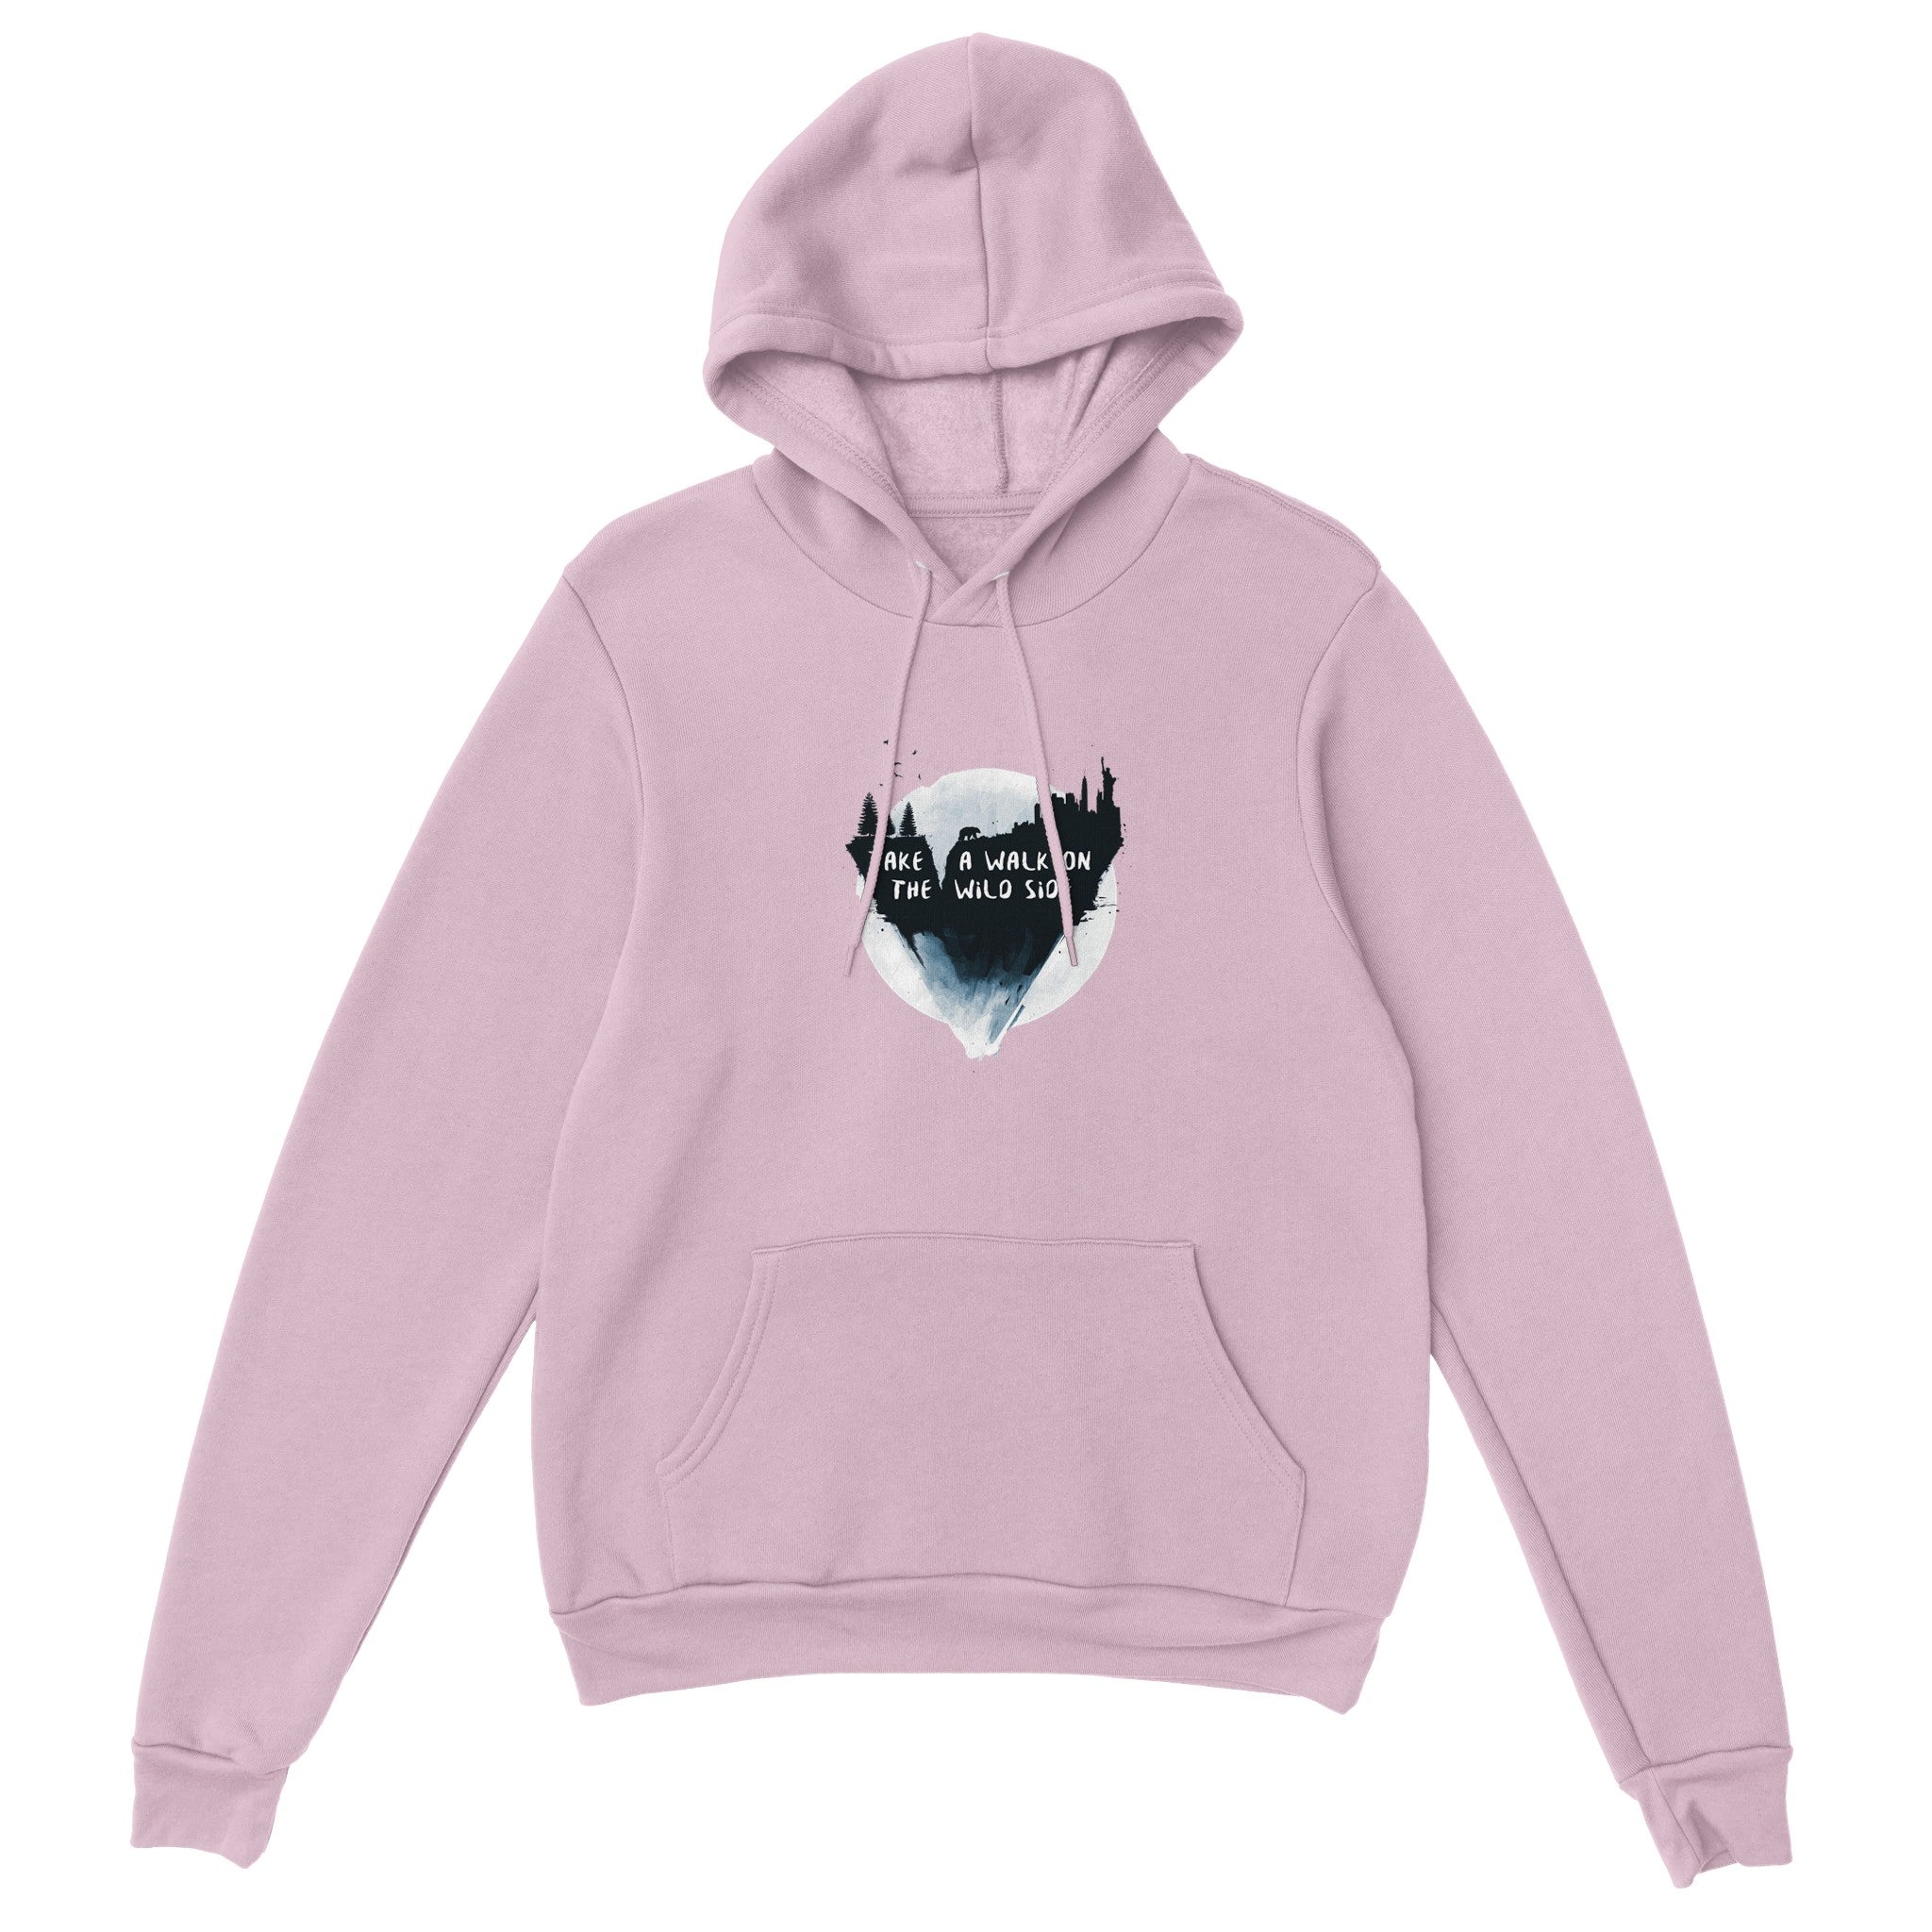 Walk On The Wild Side Pullover Hoodie